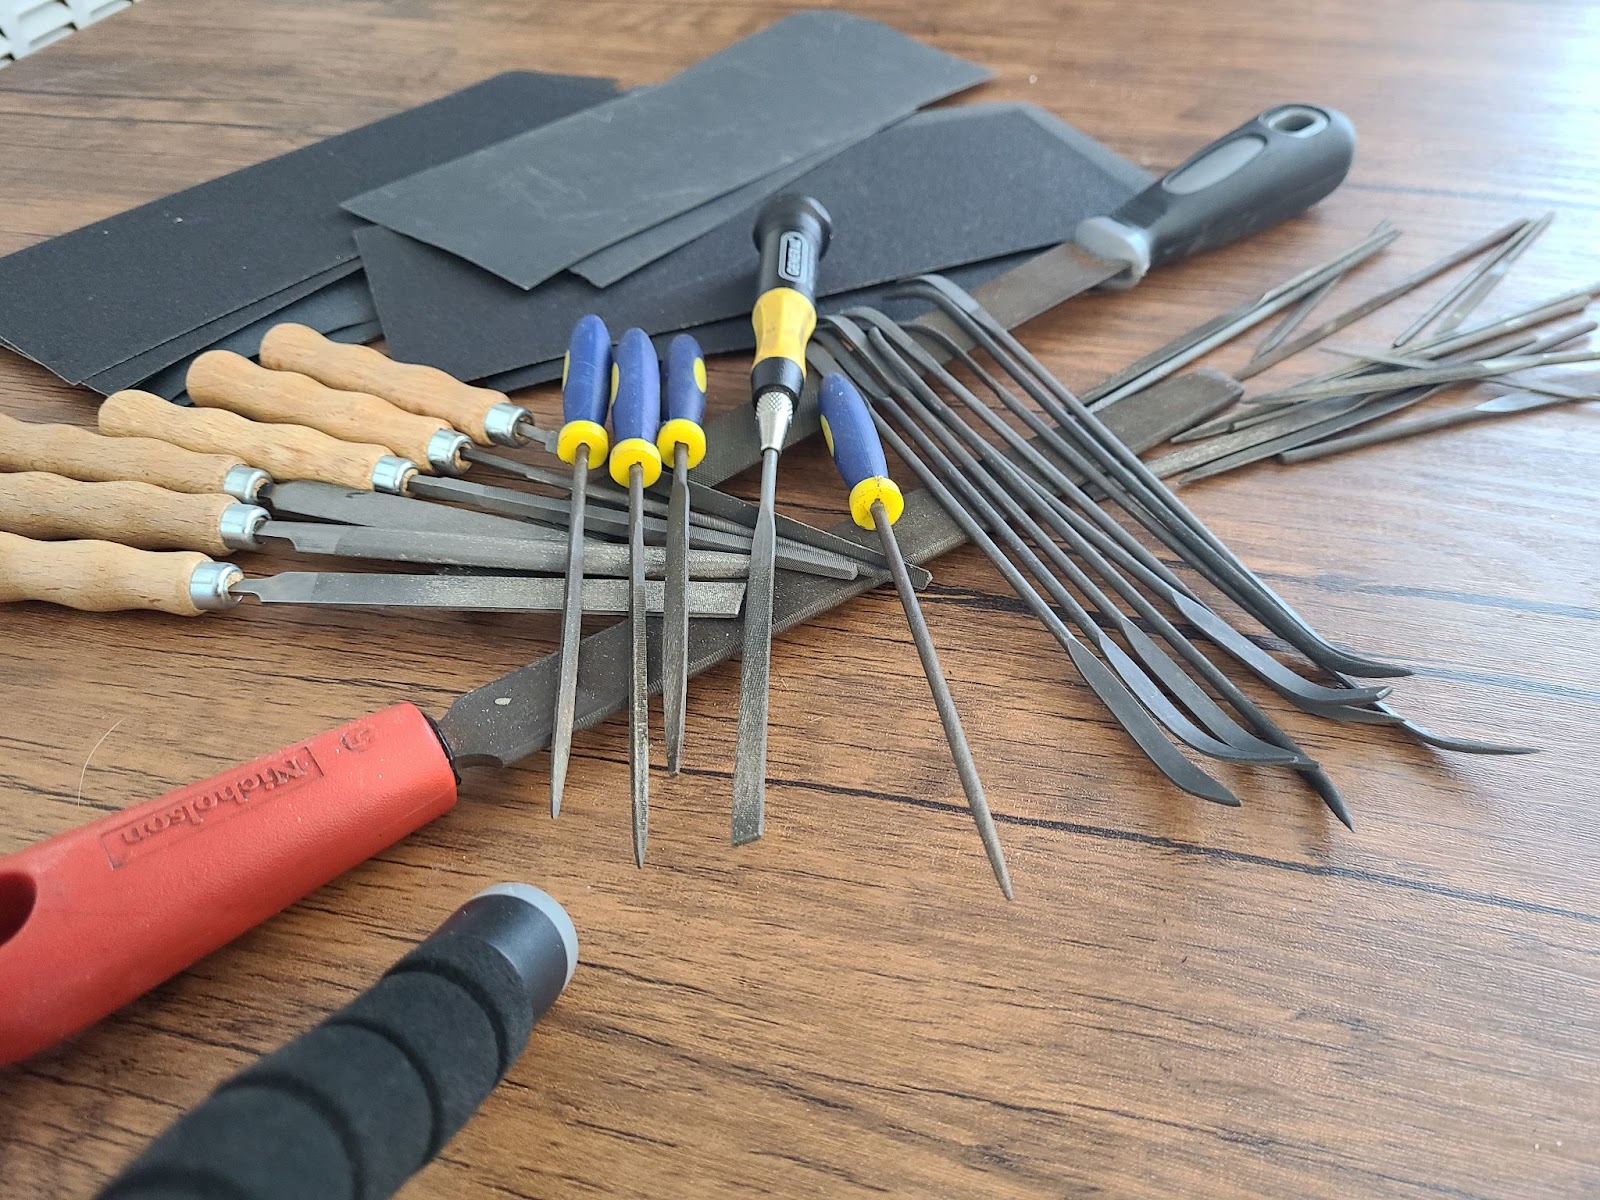 tools for silversmithing include files and abrasives